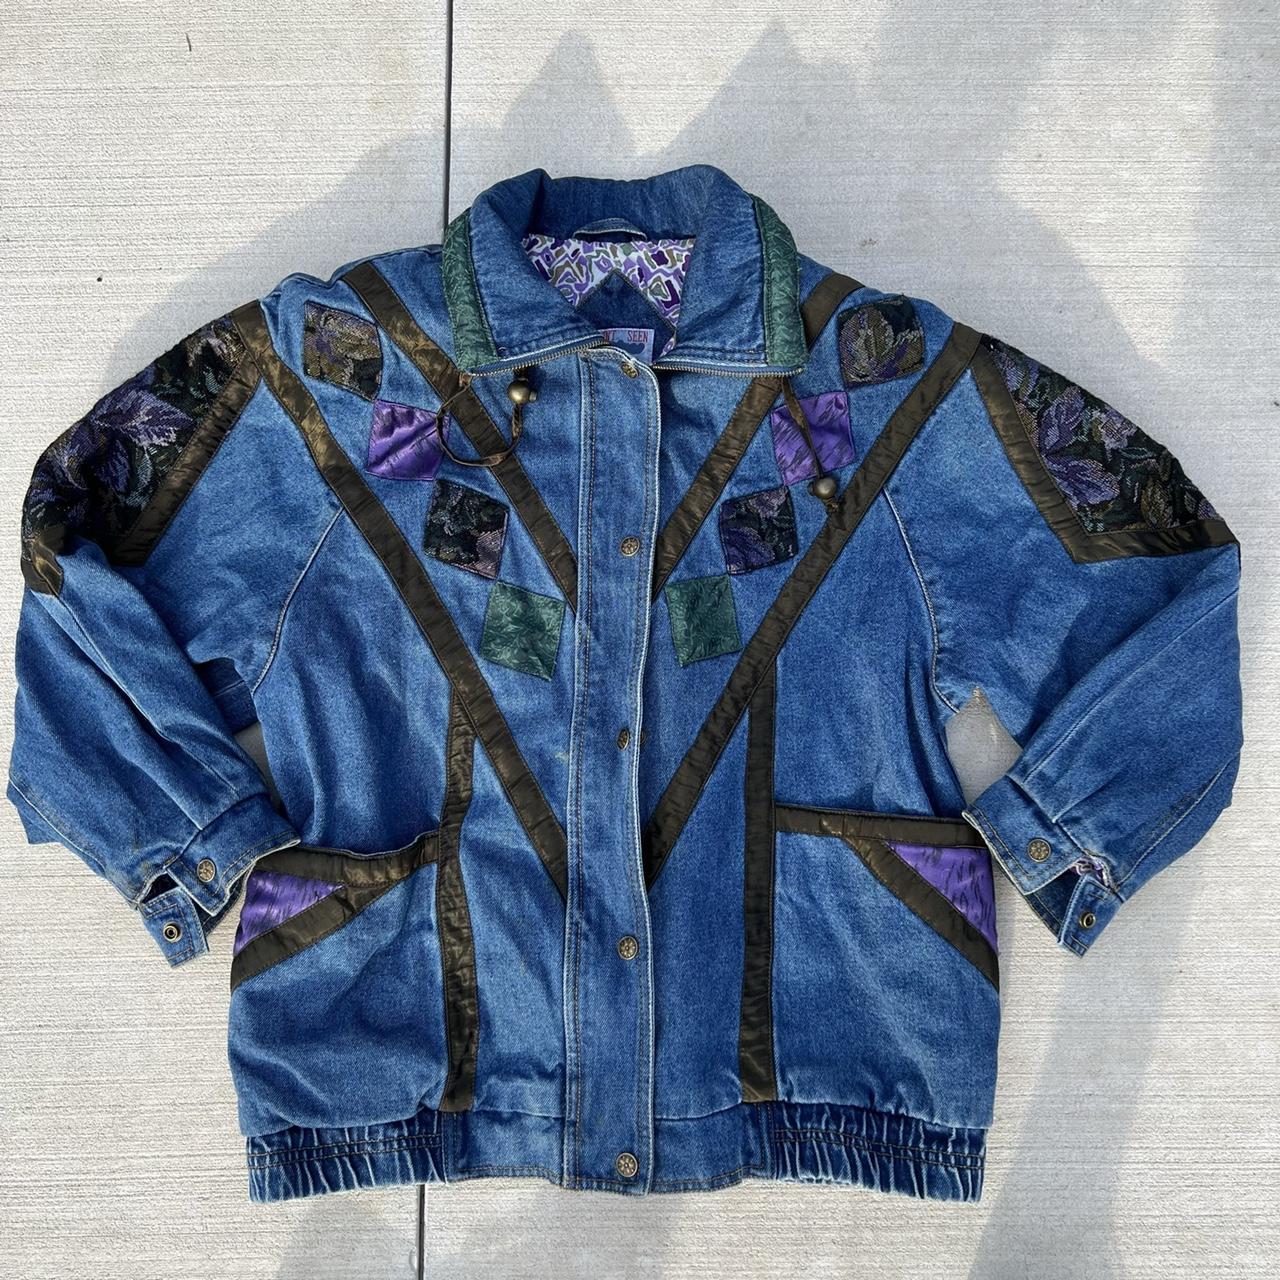 Current Seen Men's Blue and Purple Jacket